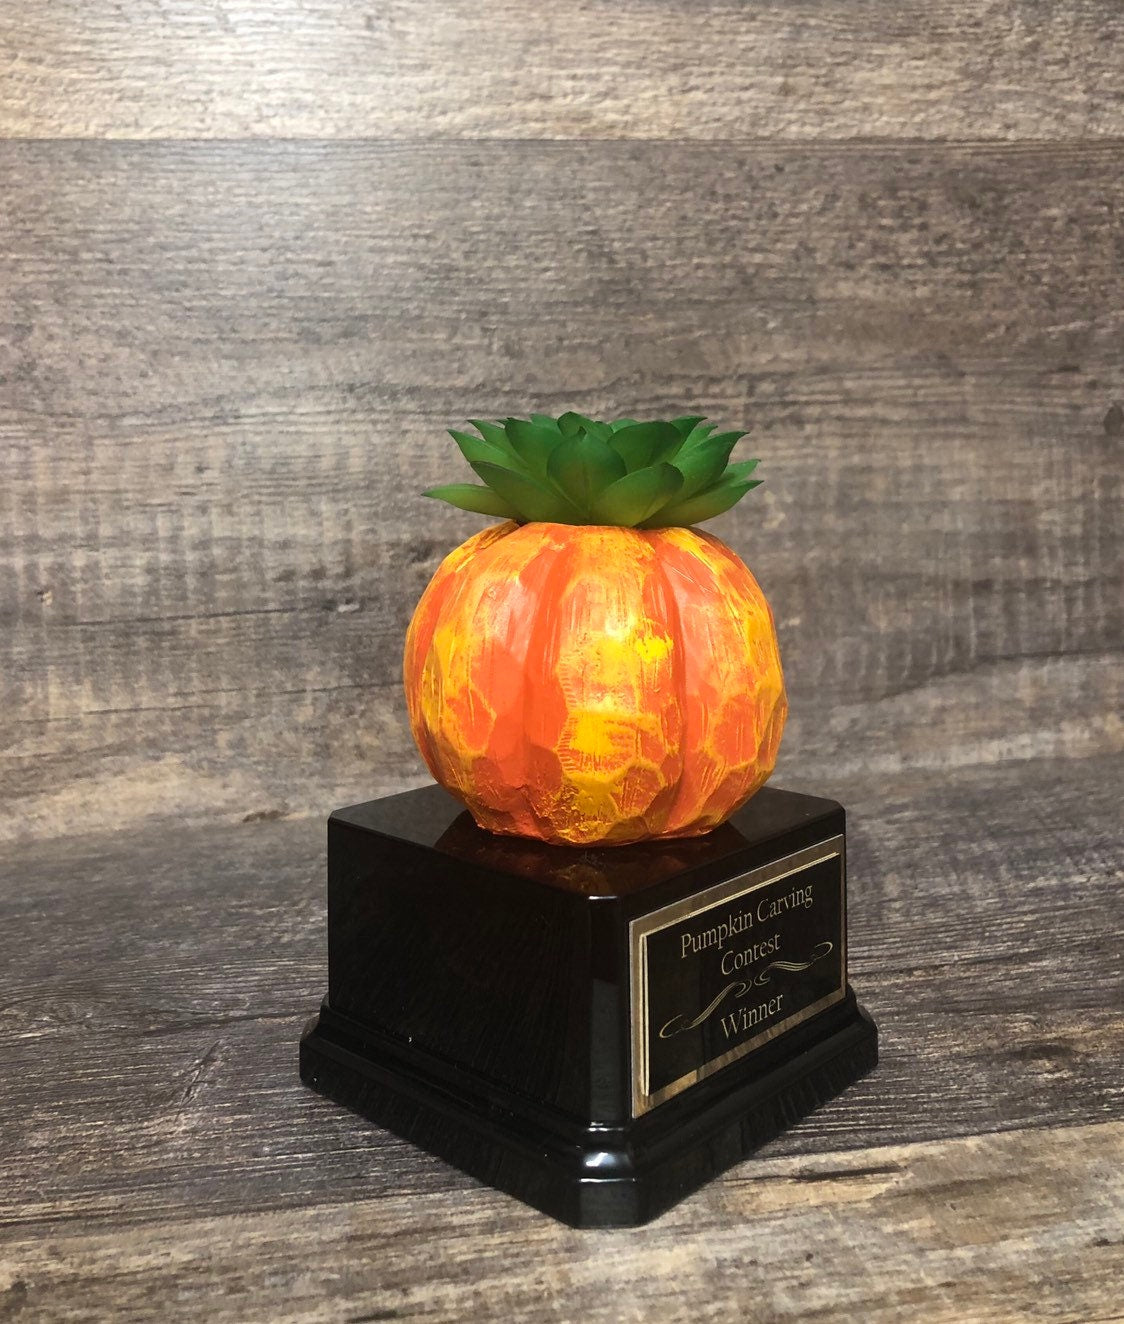 Halloween Trophy Pumpkin Carving Contest Pumpkin with PLASTIC Succulence Plant Costume Contest Jack O Lantern Trophy Trunk or Treat Winner